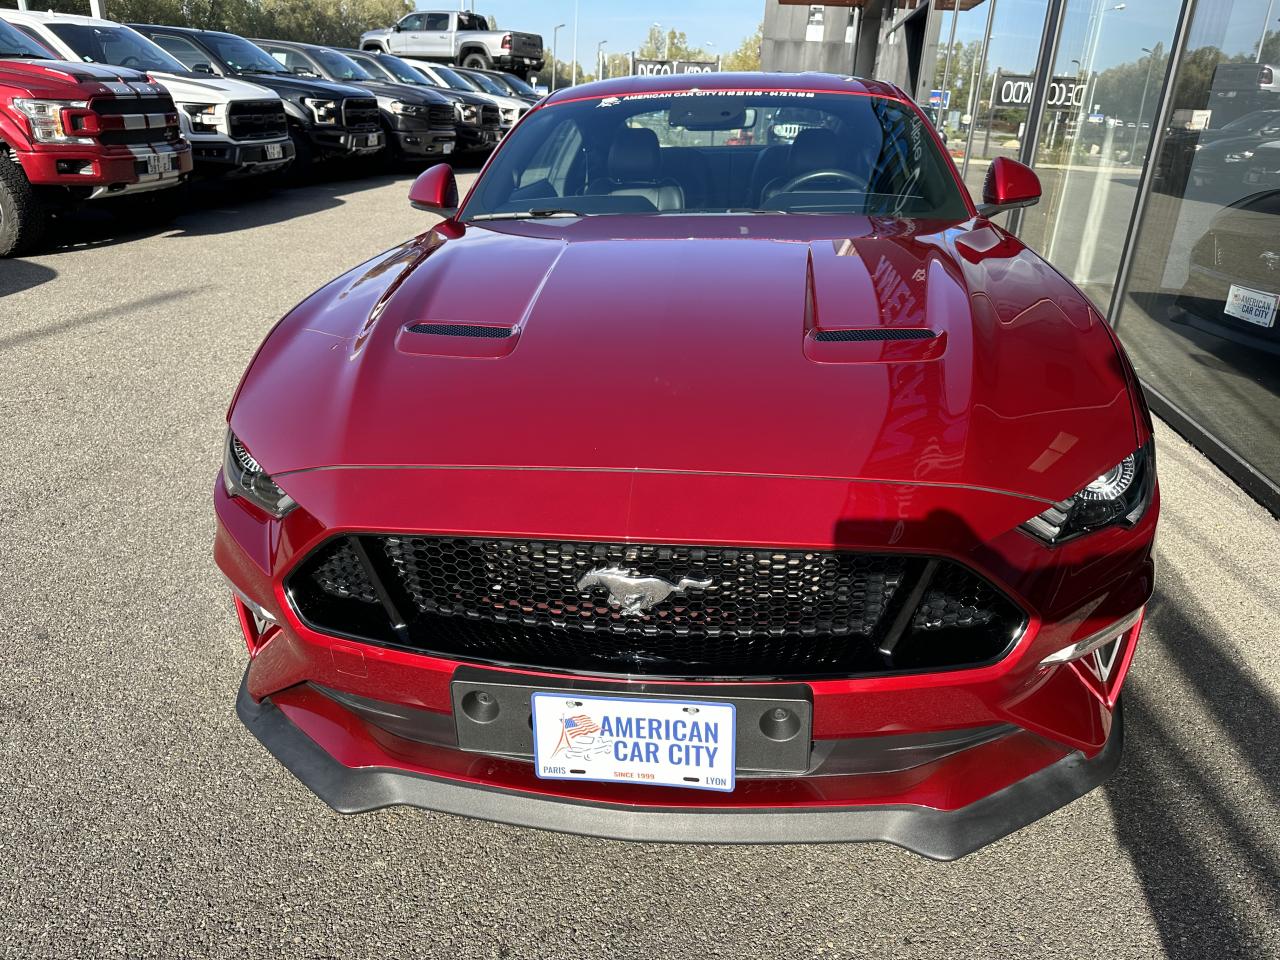 FORD MUSTANG GT V8 5.0L 2019